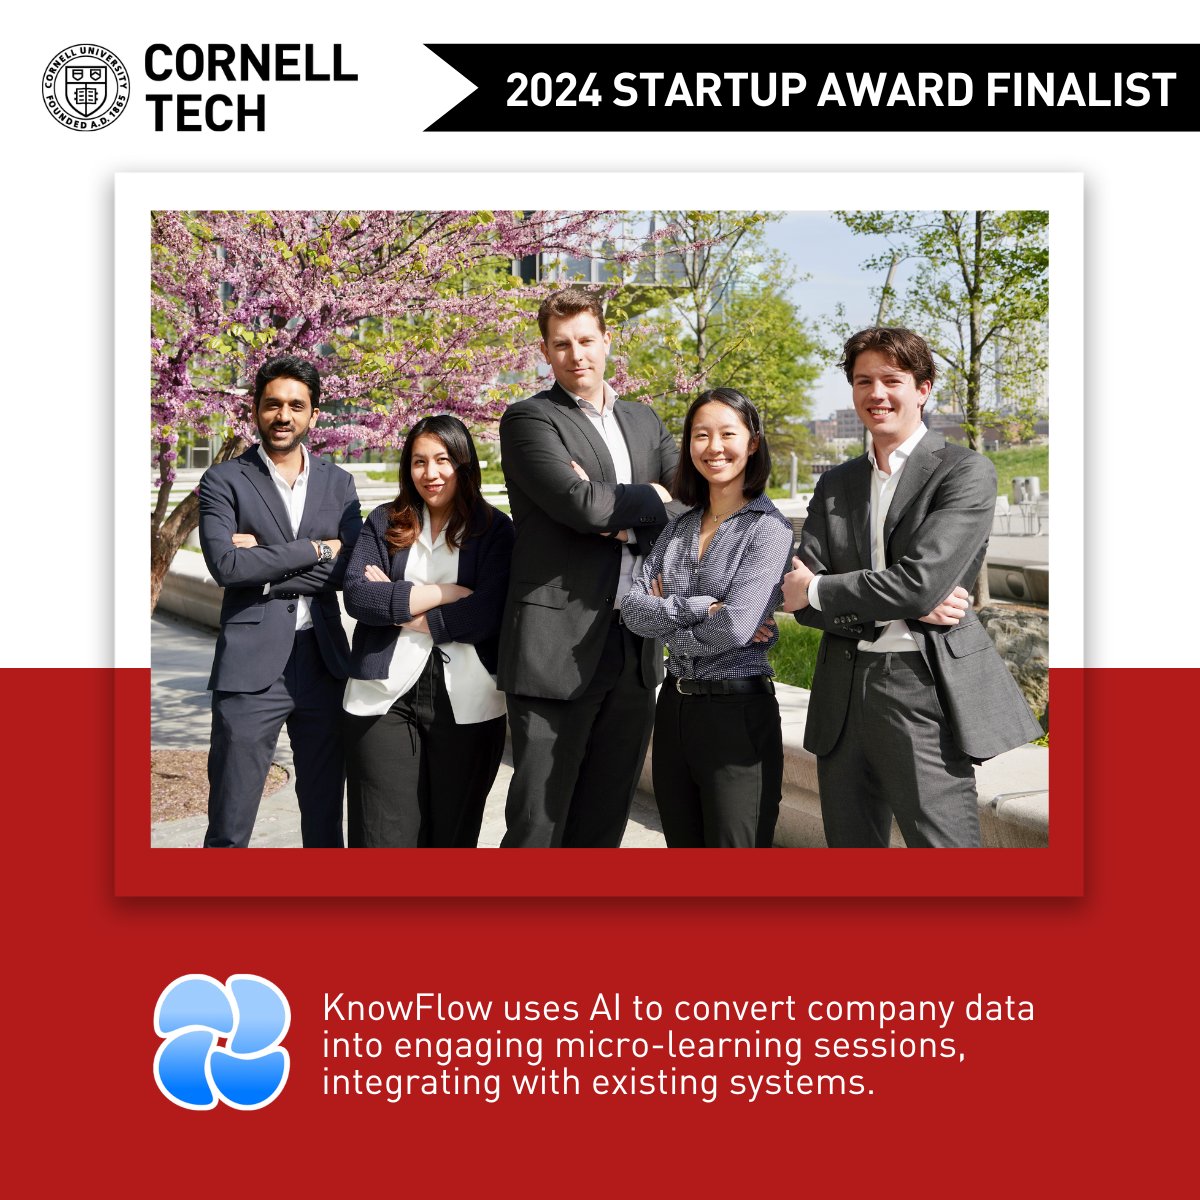 Announcing startup company KnowFlow as a finalist in the 2024 #StartupAwards competition on May 17 at #CornellTech’s #OpenStudio! KnowFlow uses AI to convert company data into engaging micro-learning sessions, integrating with existing systems. bit.ly/3U5VXmH